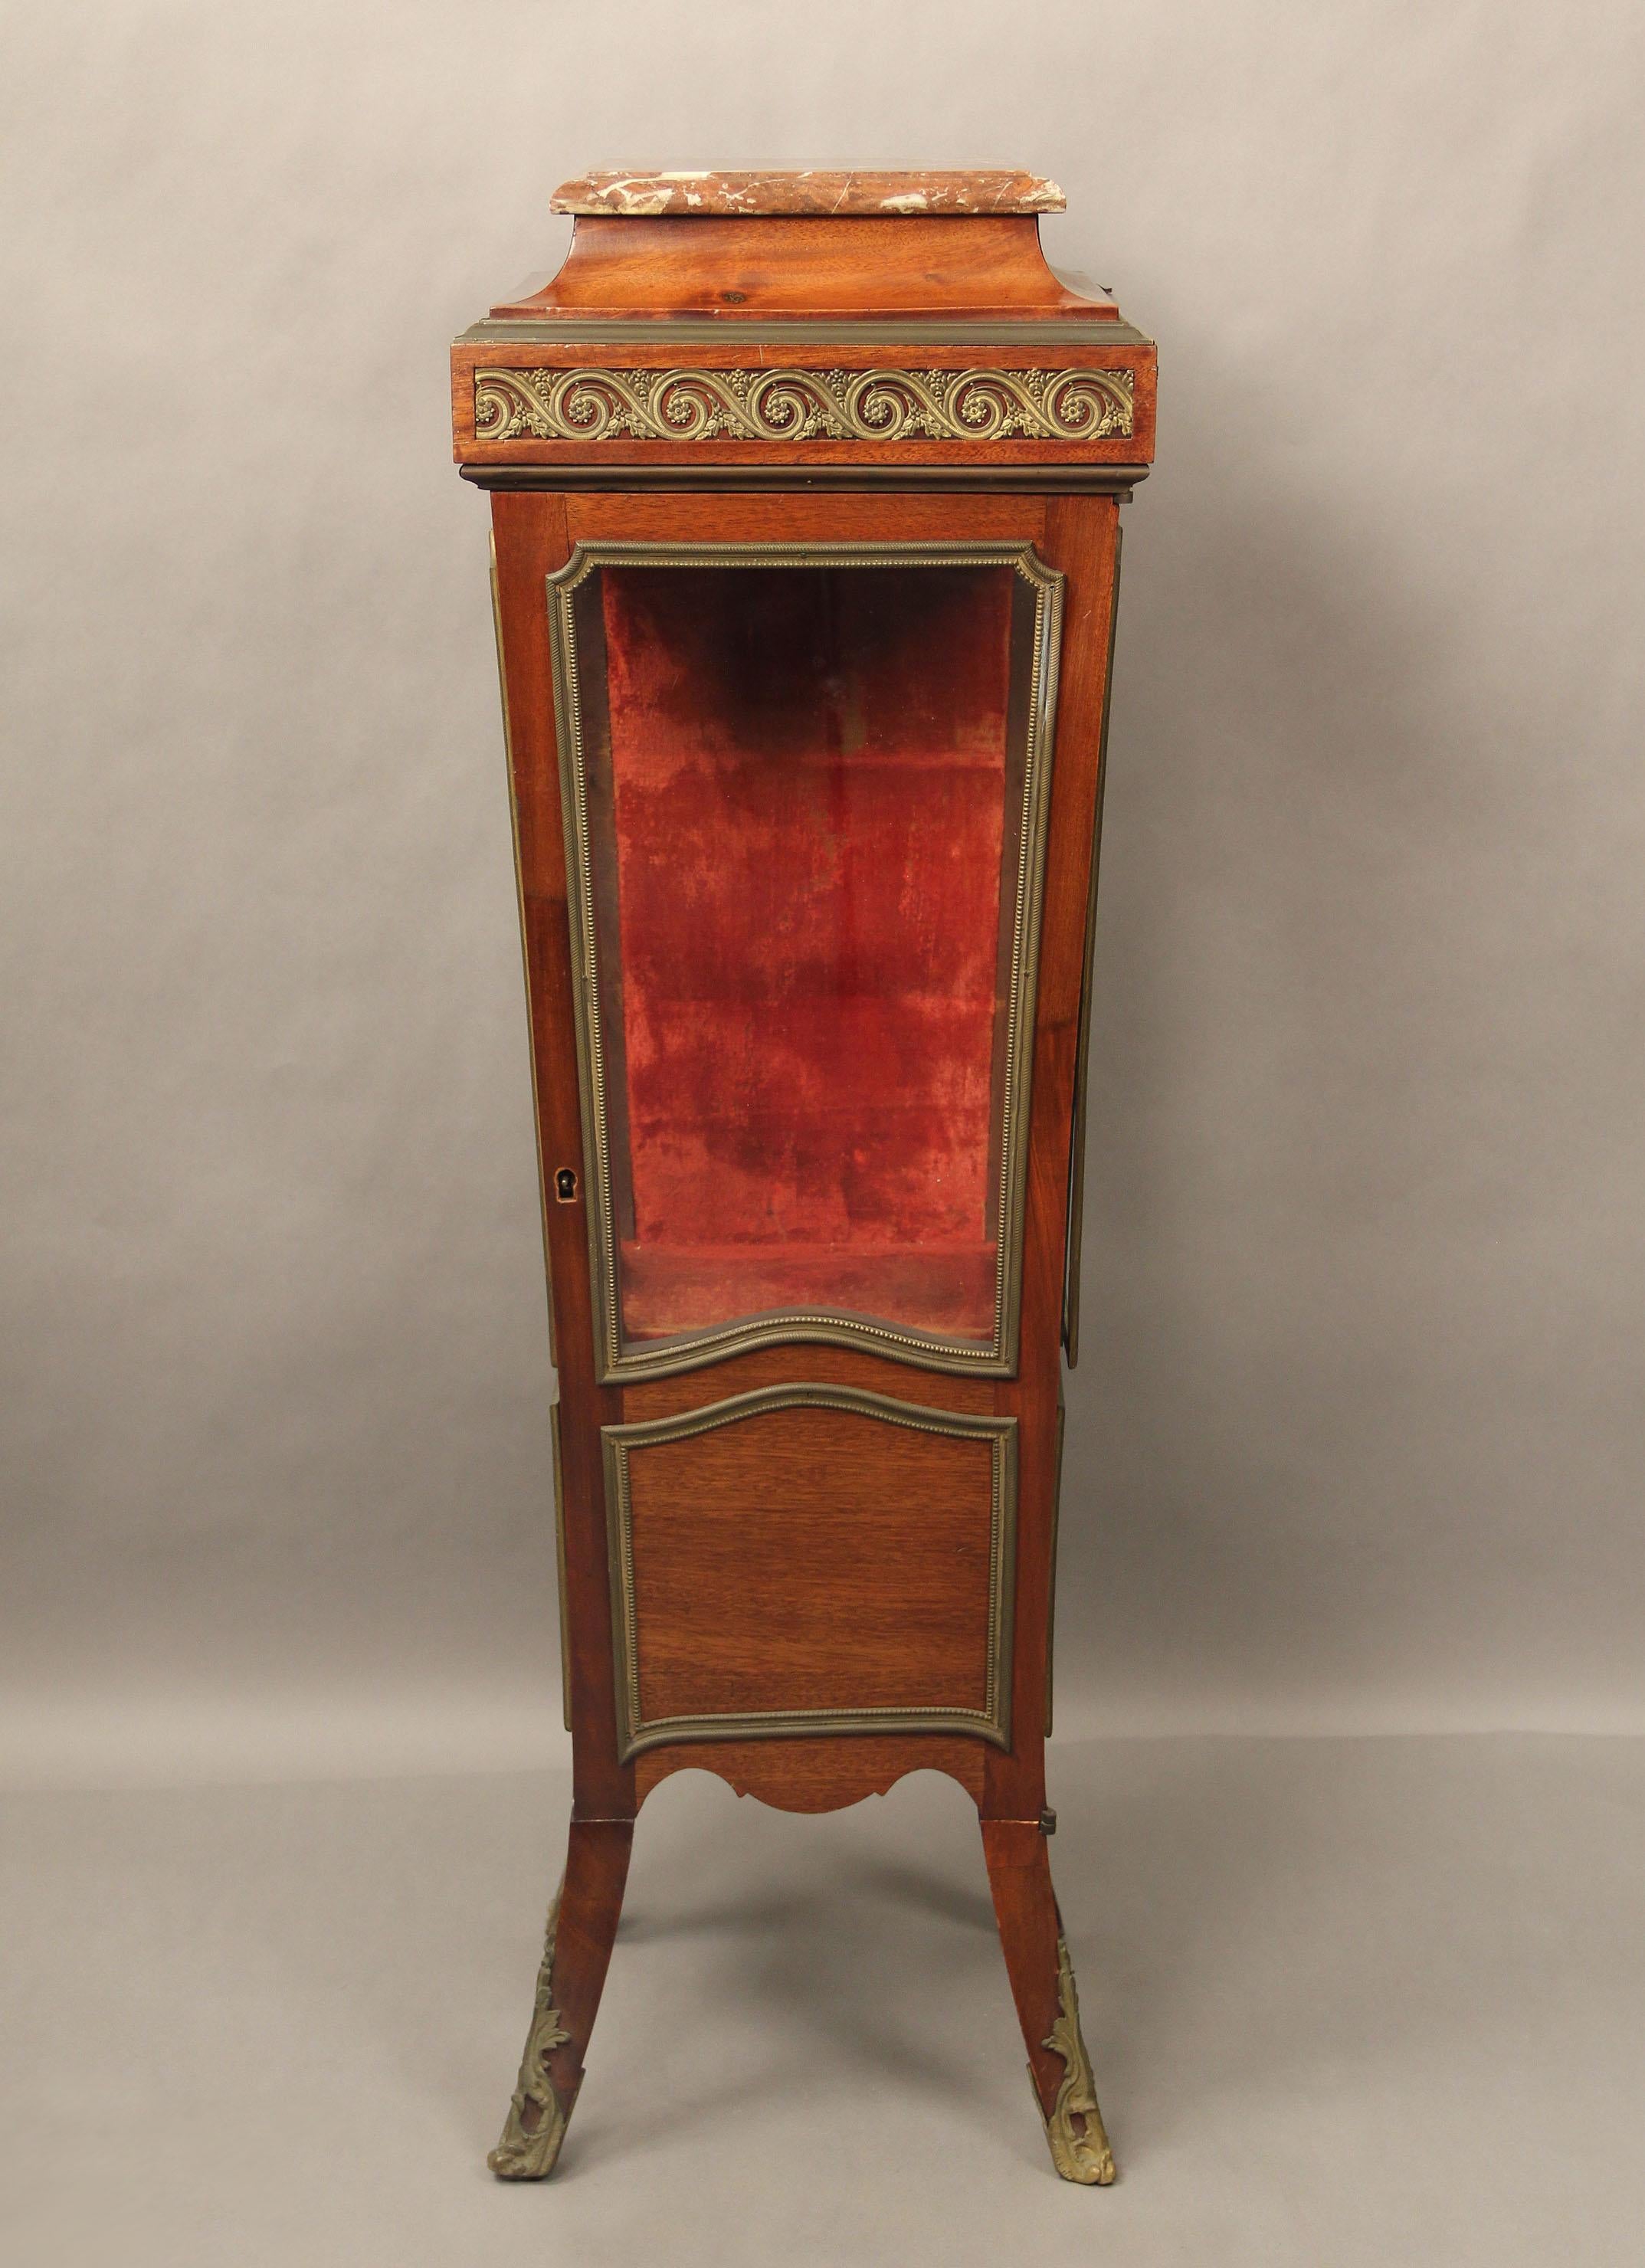 A very interesting late 19th century gilt bronze mounted transitional style vitrine pedestal

The square rouge marble top above a frieze, a single central door opens to a red velvet interior with a hidden bottom compartment.

Details:
Height 43